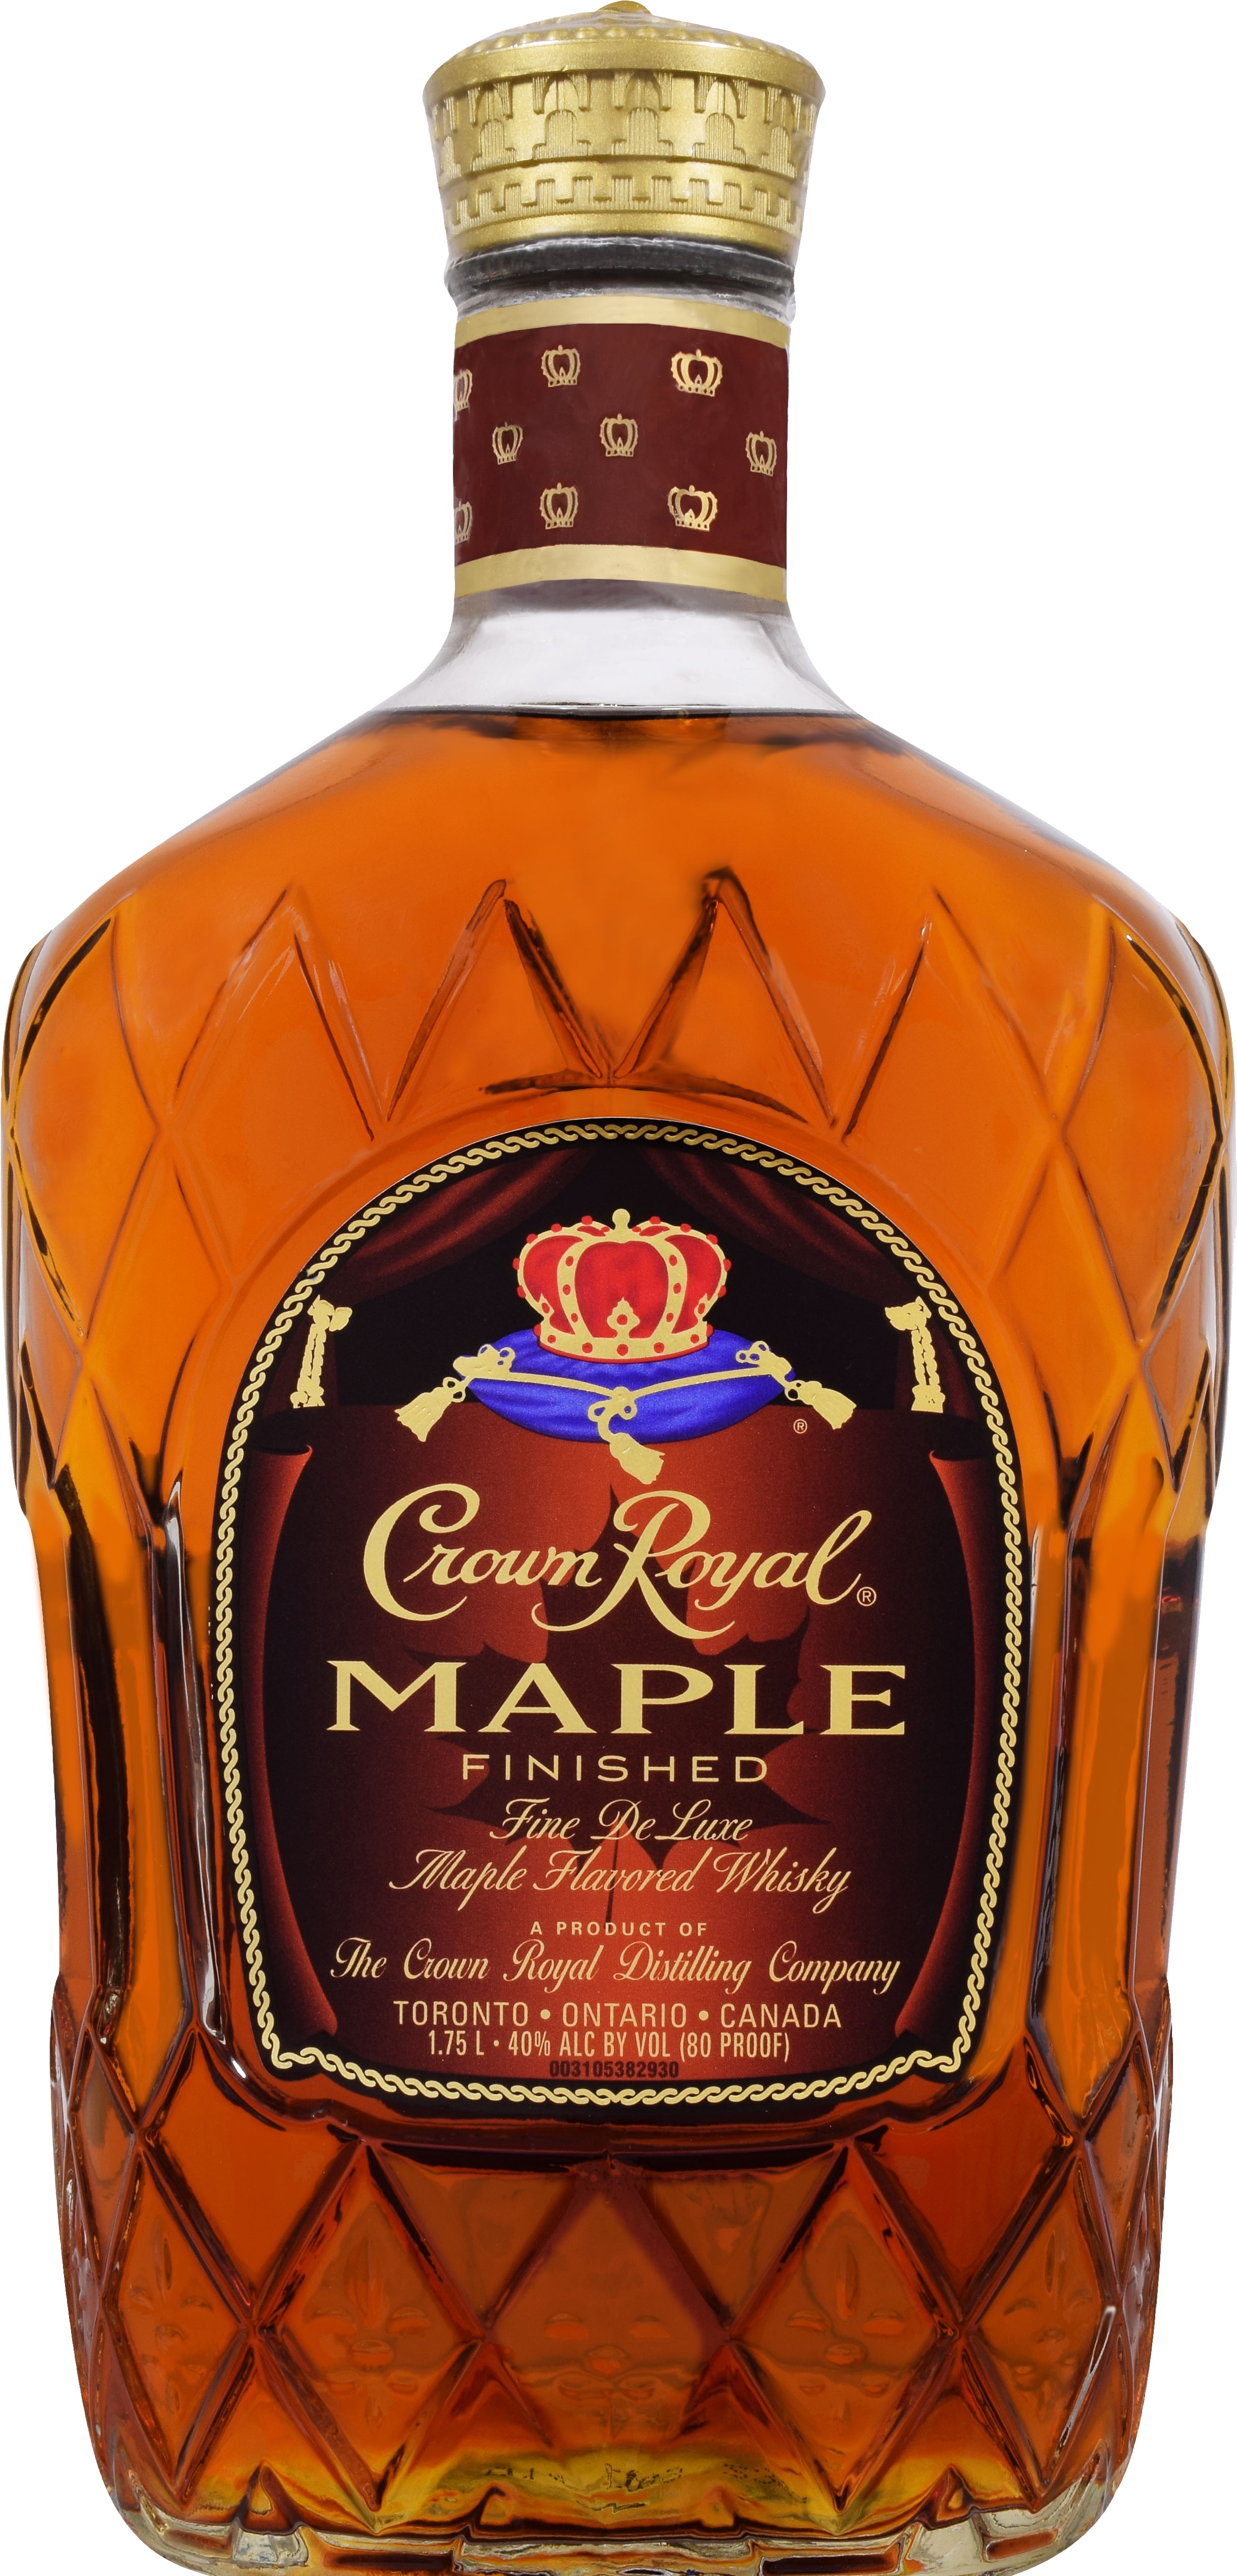 Crown Royal Maple Finished Maple Flavored Whisky, 1.75 L ...